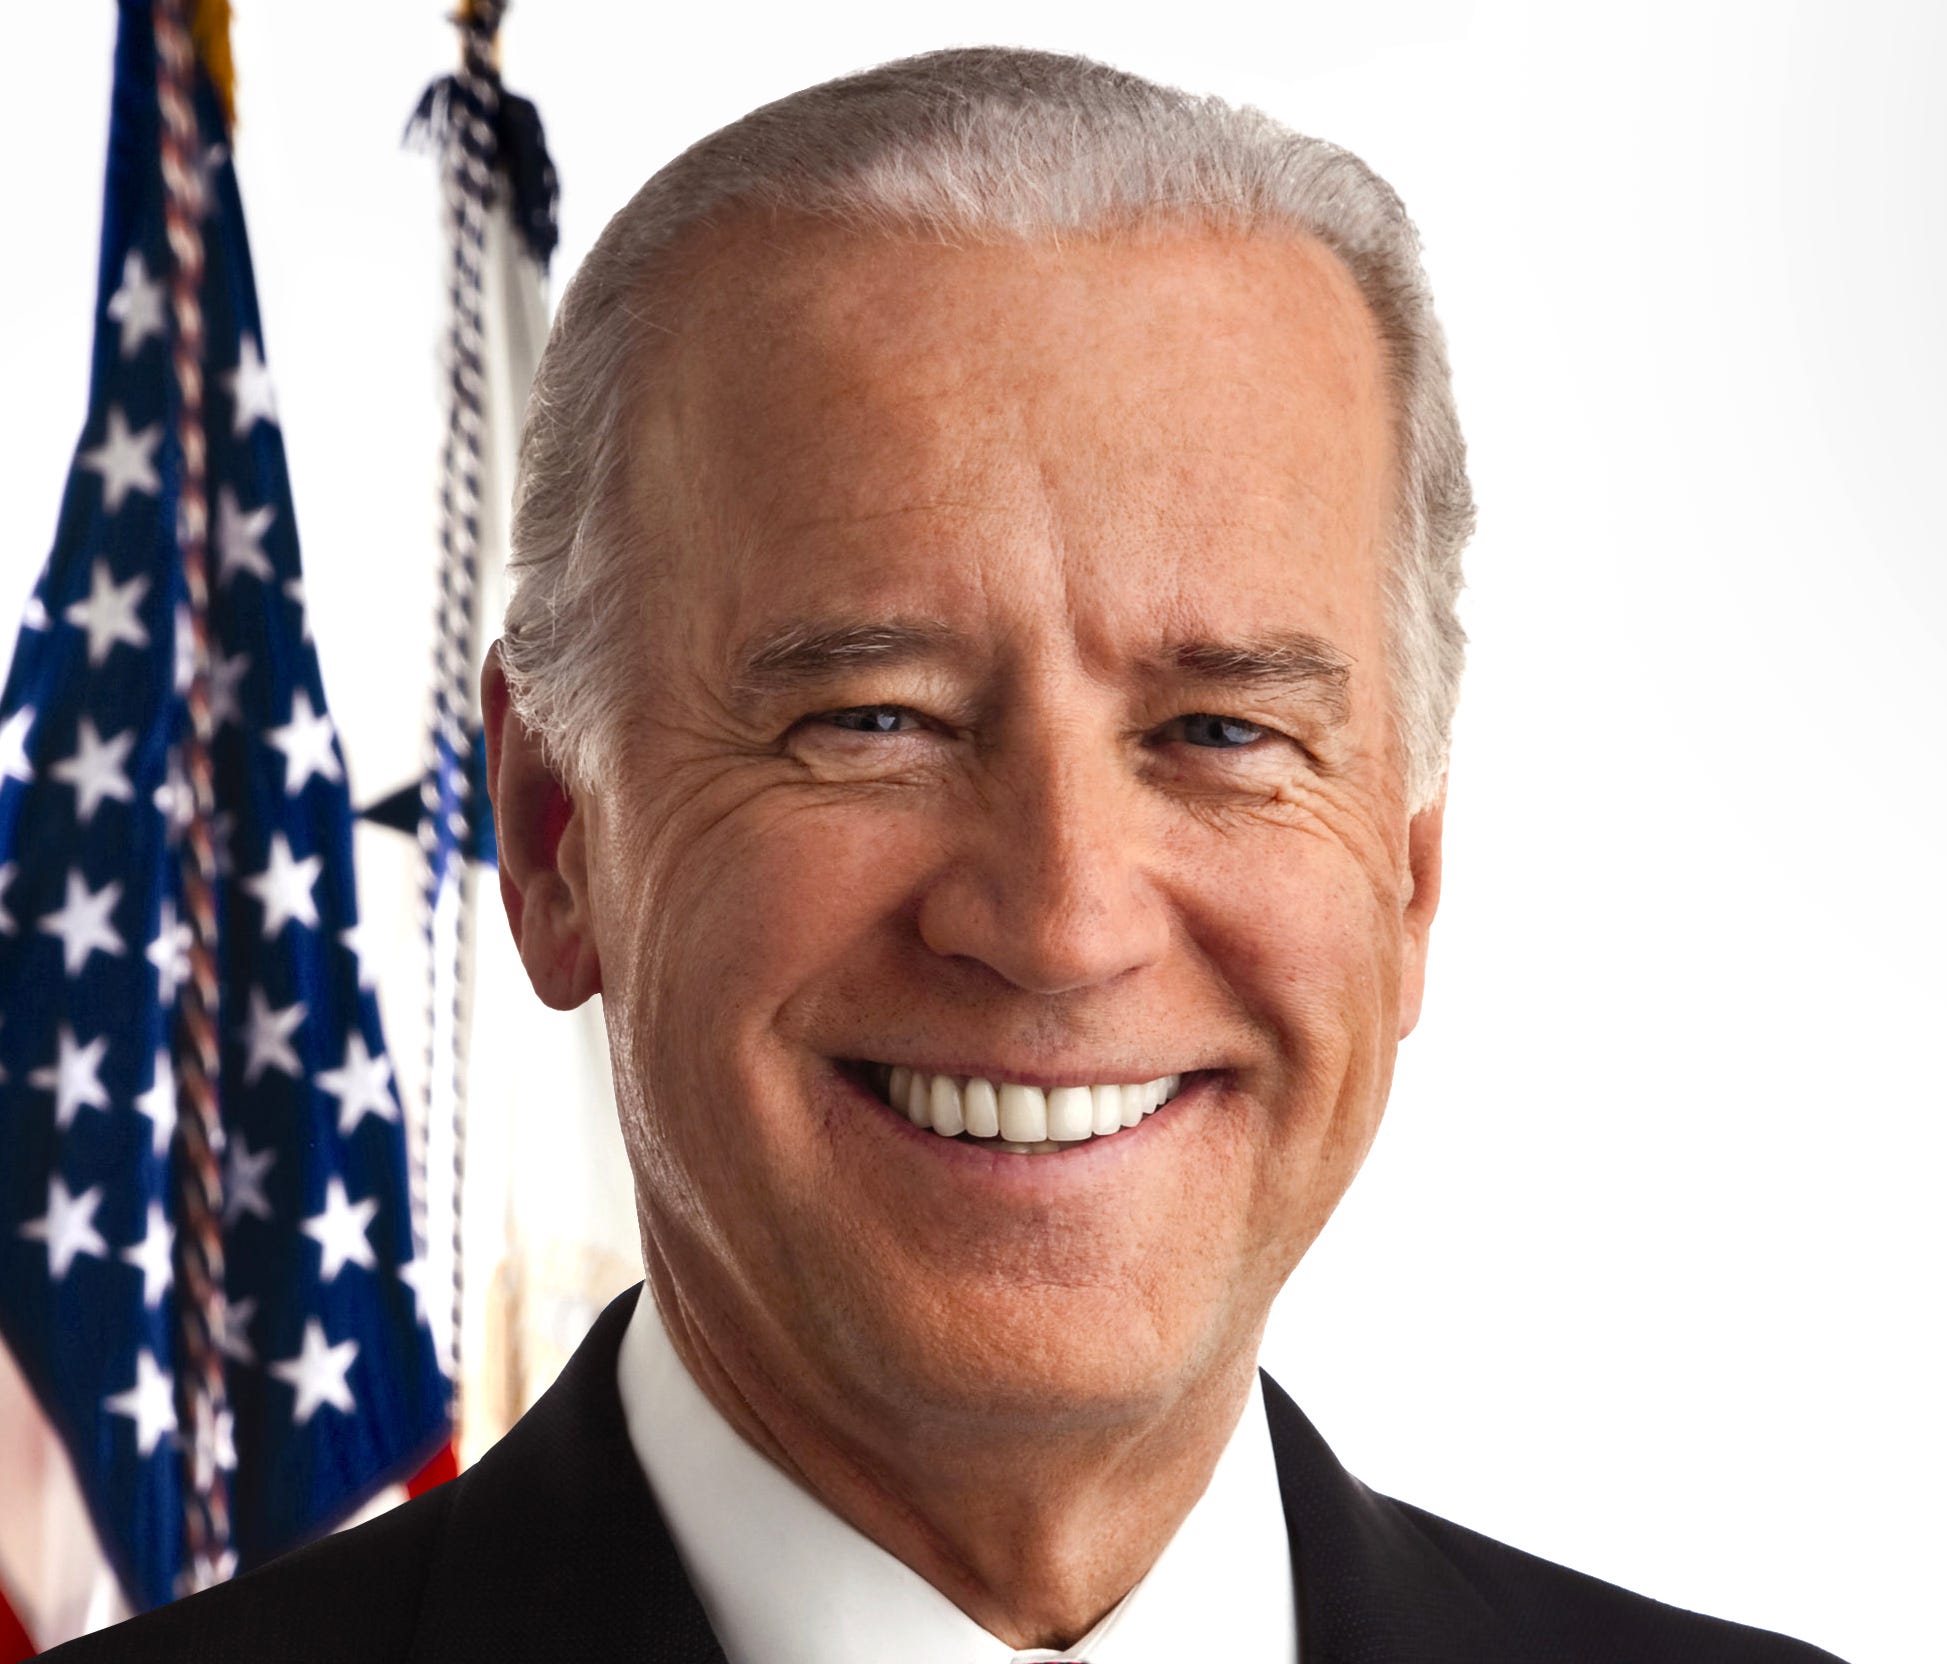 Former Vice President Joe Biden is scheduled to speak at the upcoming SXSW gathering, which begins Friday.